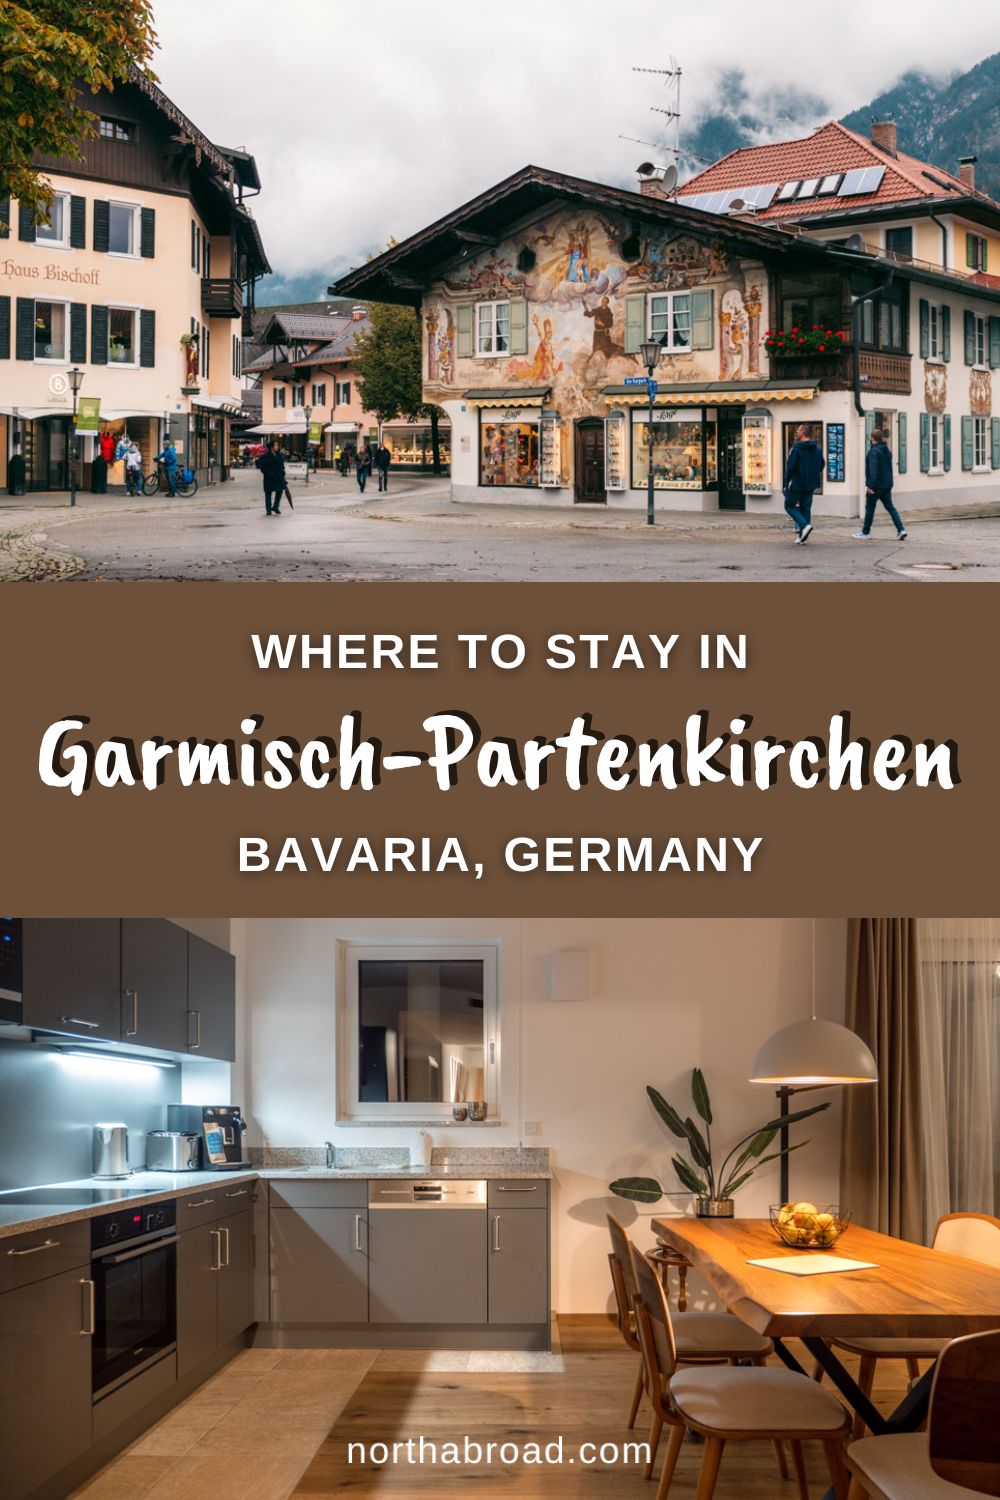 Where to Stay in Garmisch-Partenkirchen: 11 Best Hotels for All Budgets